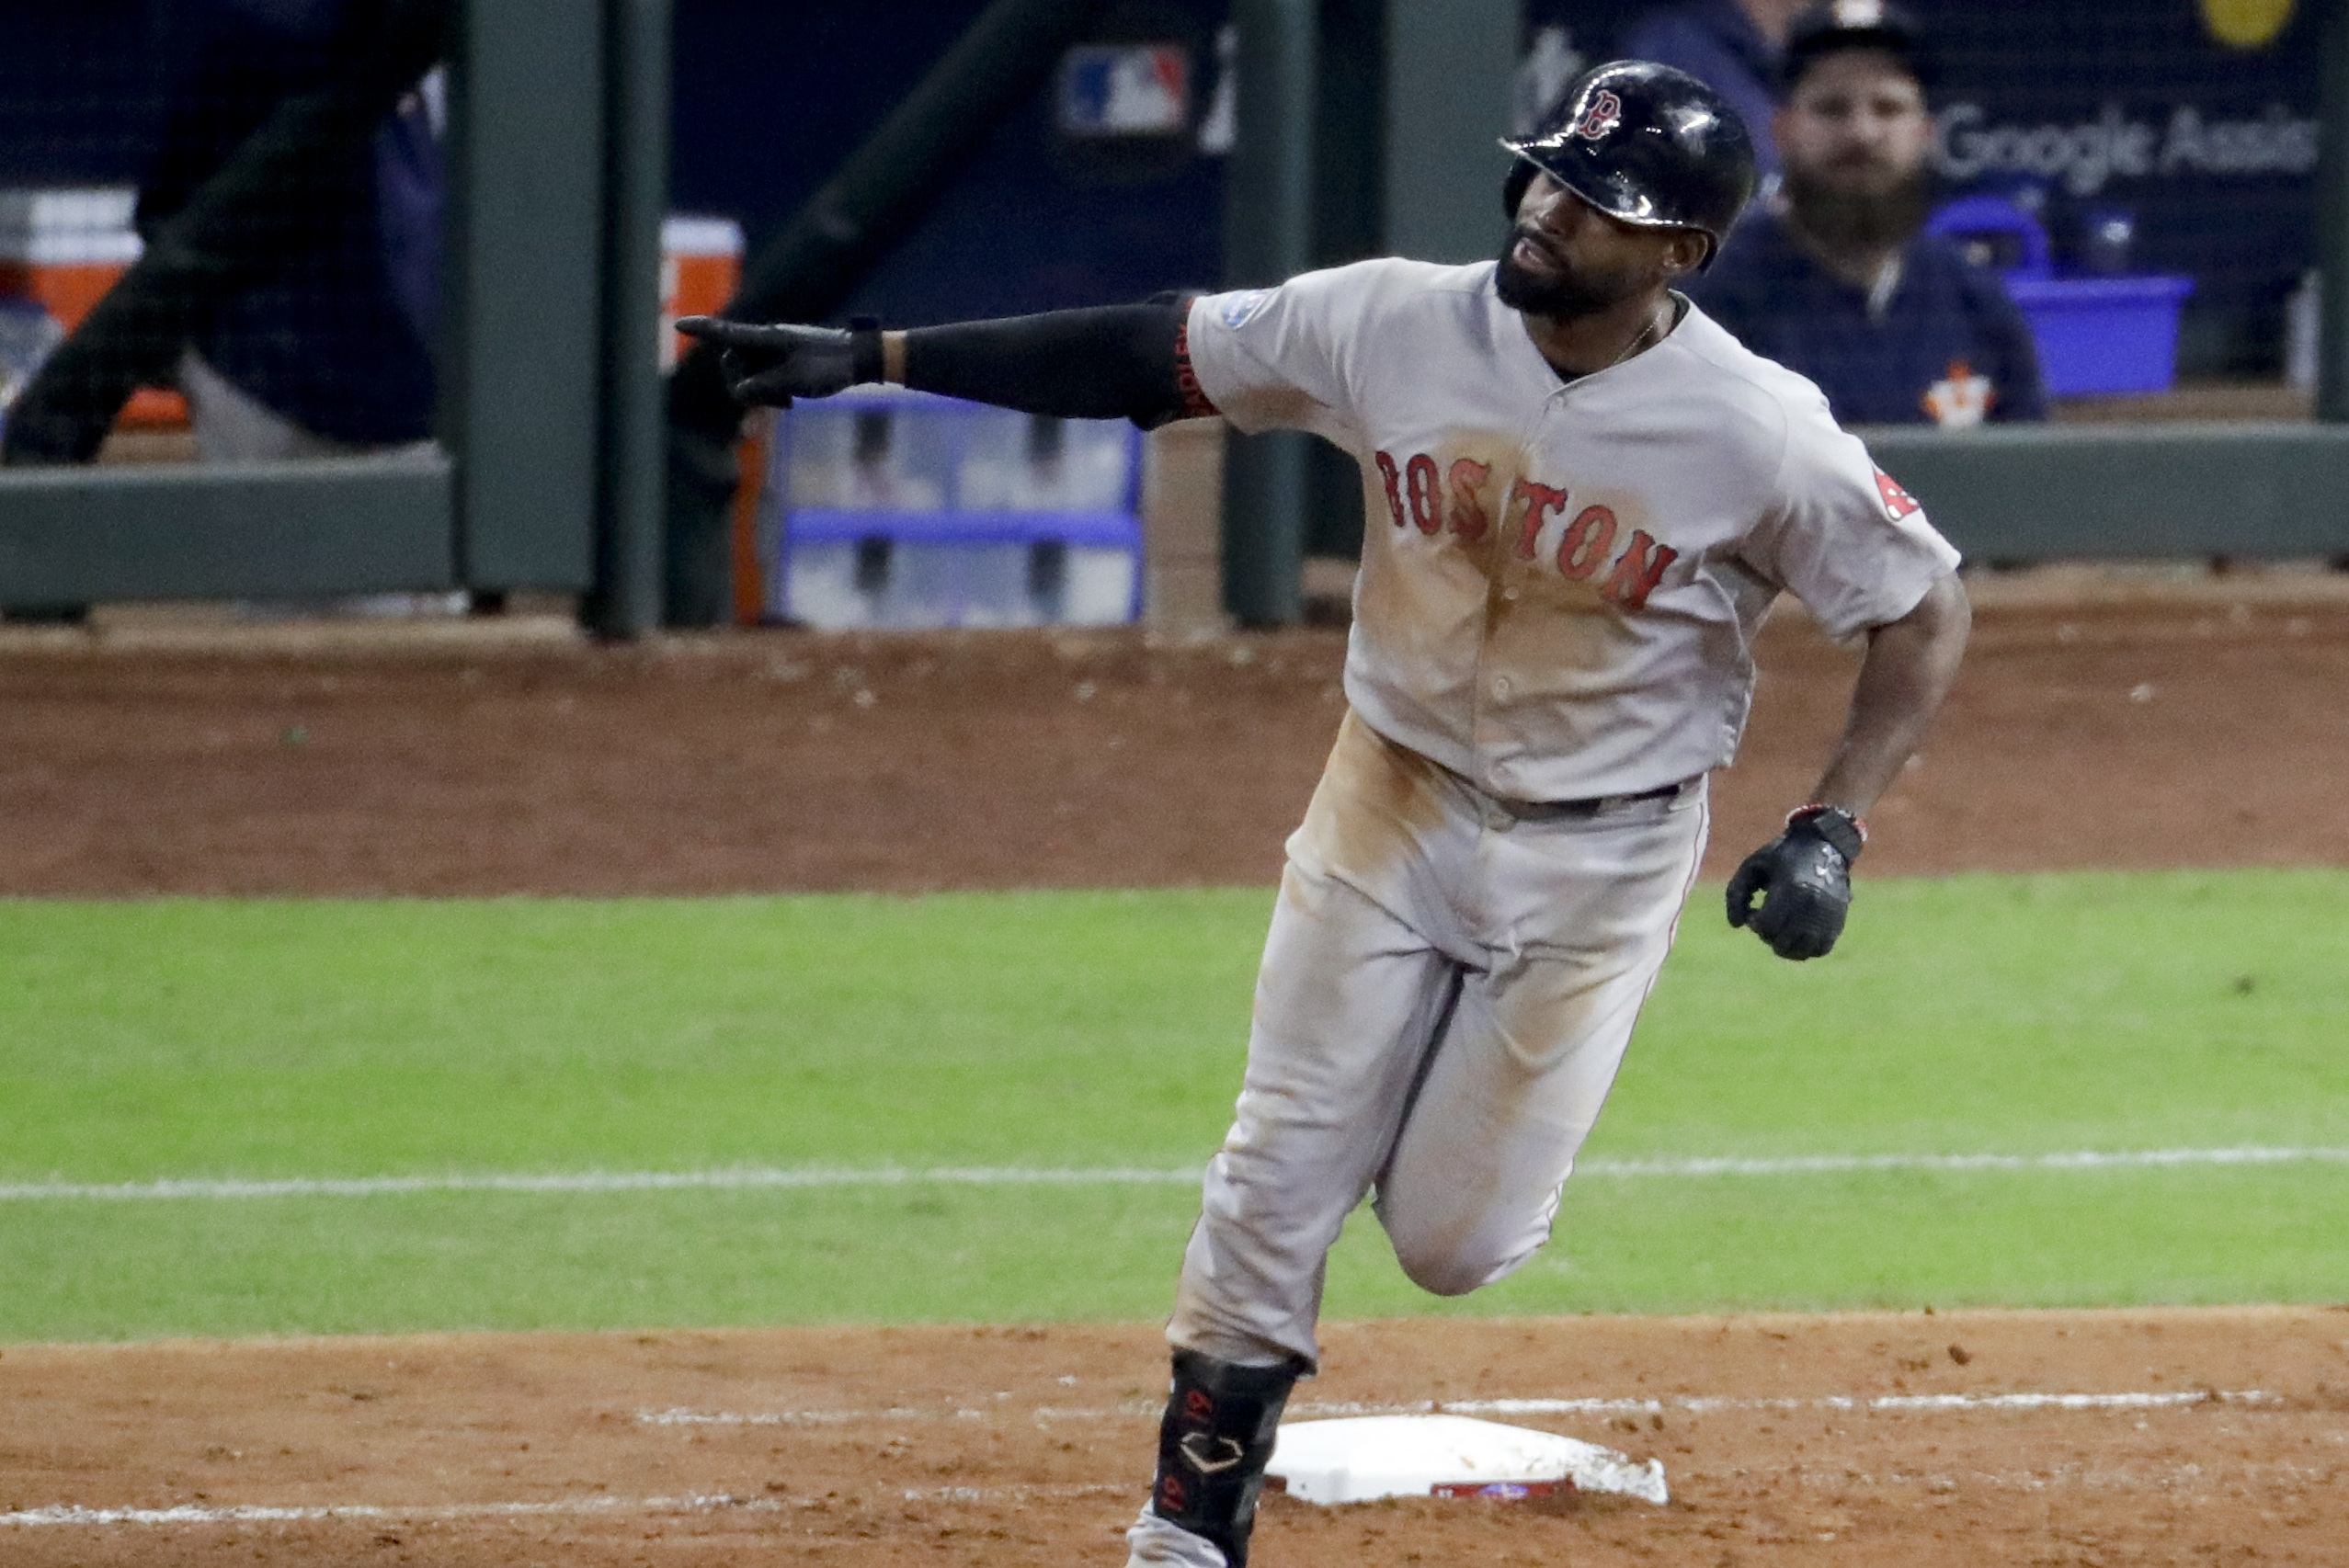 Dustin Pedroia wins fourth Gold Glove, Jackie Bradley loses out